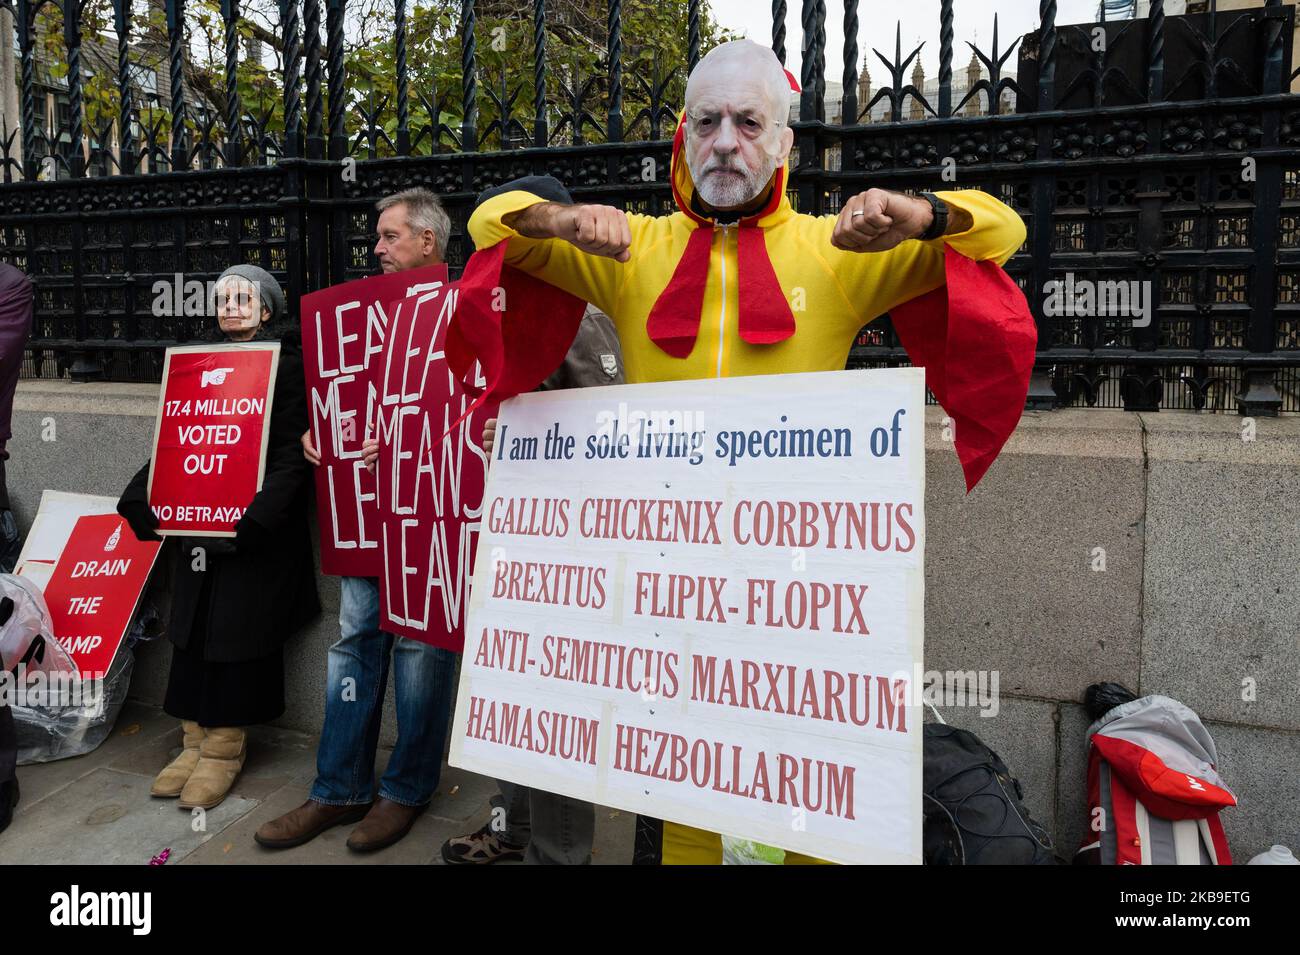 A pro-Brexit demonstrator dressed in a chicken suit and wearing a mask of Labour Party's leader Jeremy Corbyn protest outside the Houses of Parliament on 28 October, 2019 in London, England. Today MPs debate and vote on a government's motion calling for a General Election to take place on 12 December 2019. The European Union granted a Brexit etension until 31 January 2020 with an option for the UK to leave earlier if a deal is ratified. (Photo by WIktor Szymanowicz/NurPhoto) Stock Photo